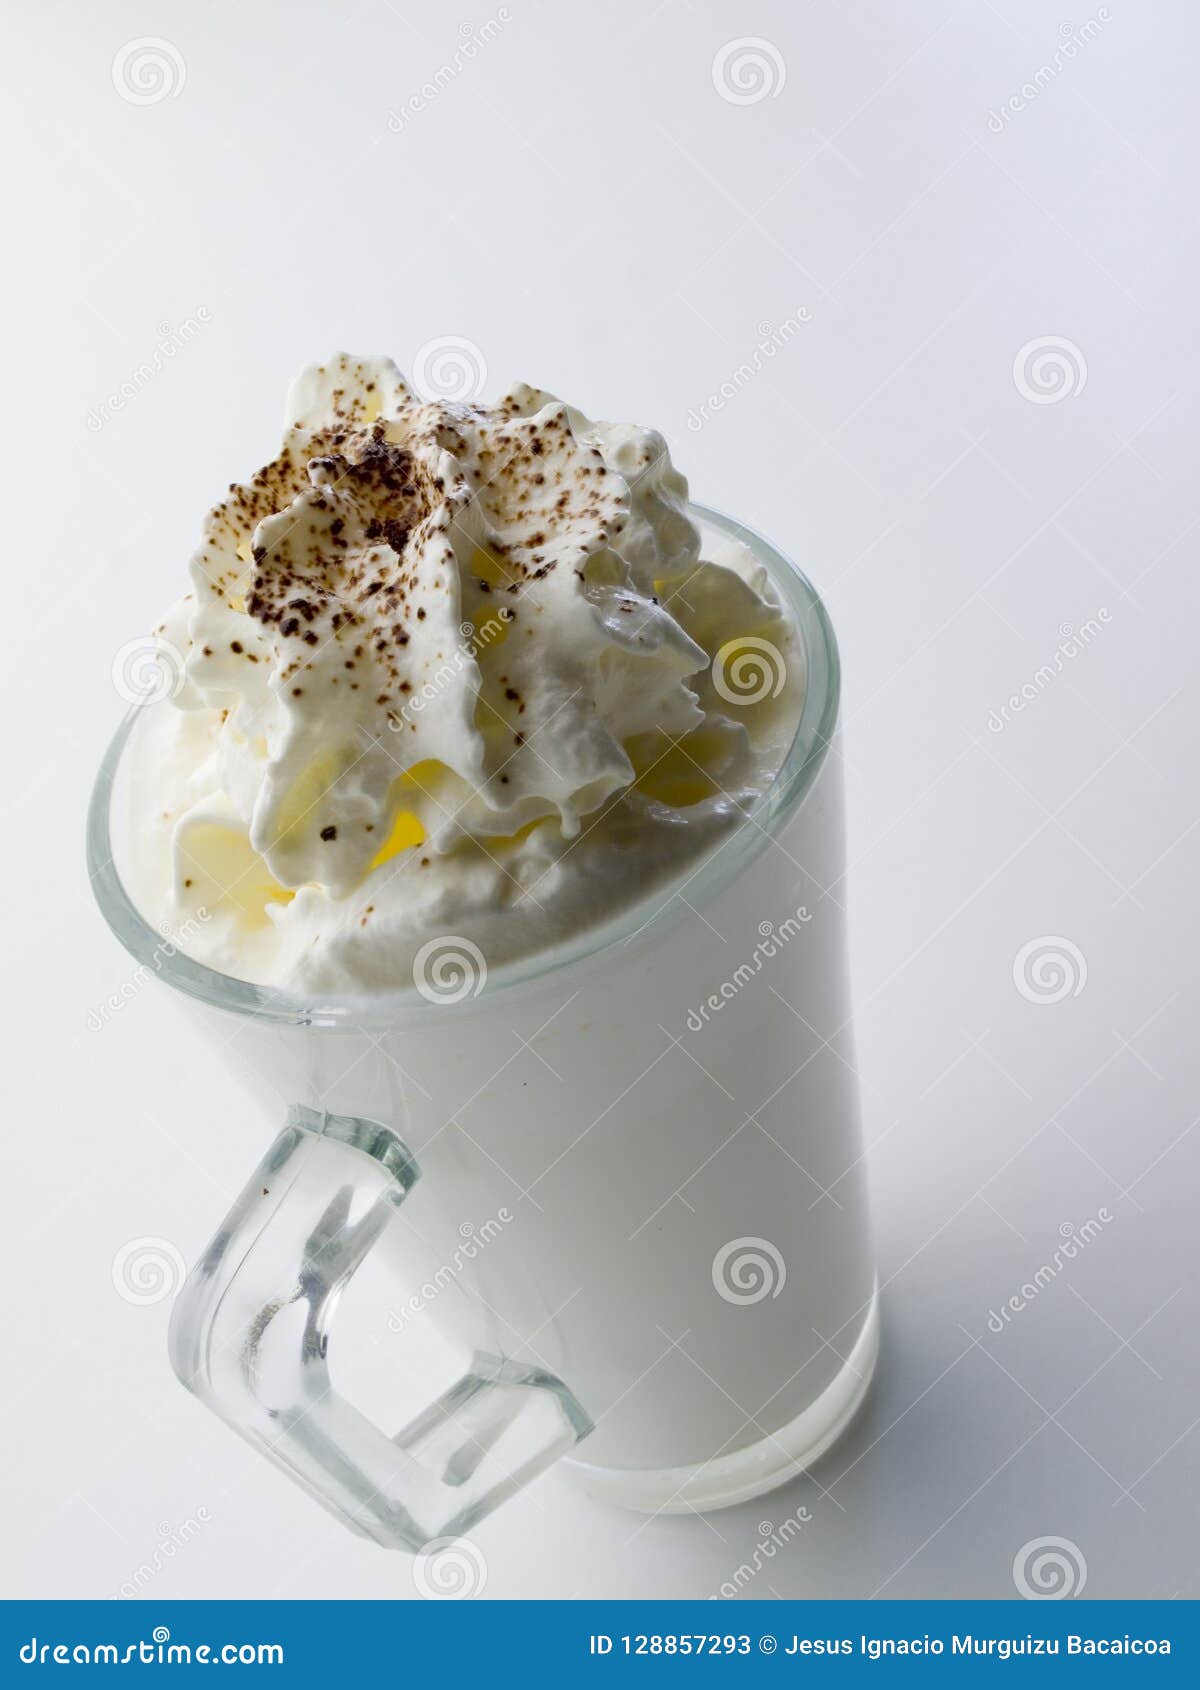 A Glass Cup Filled With Whipped Crea